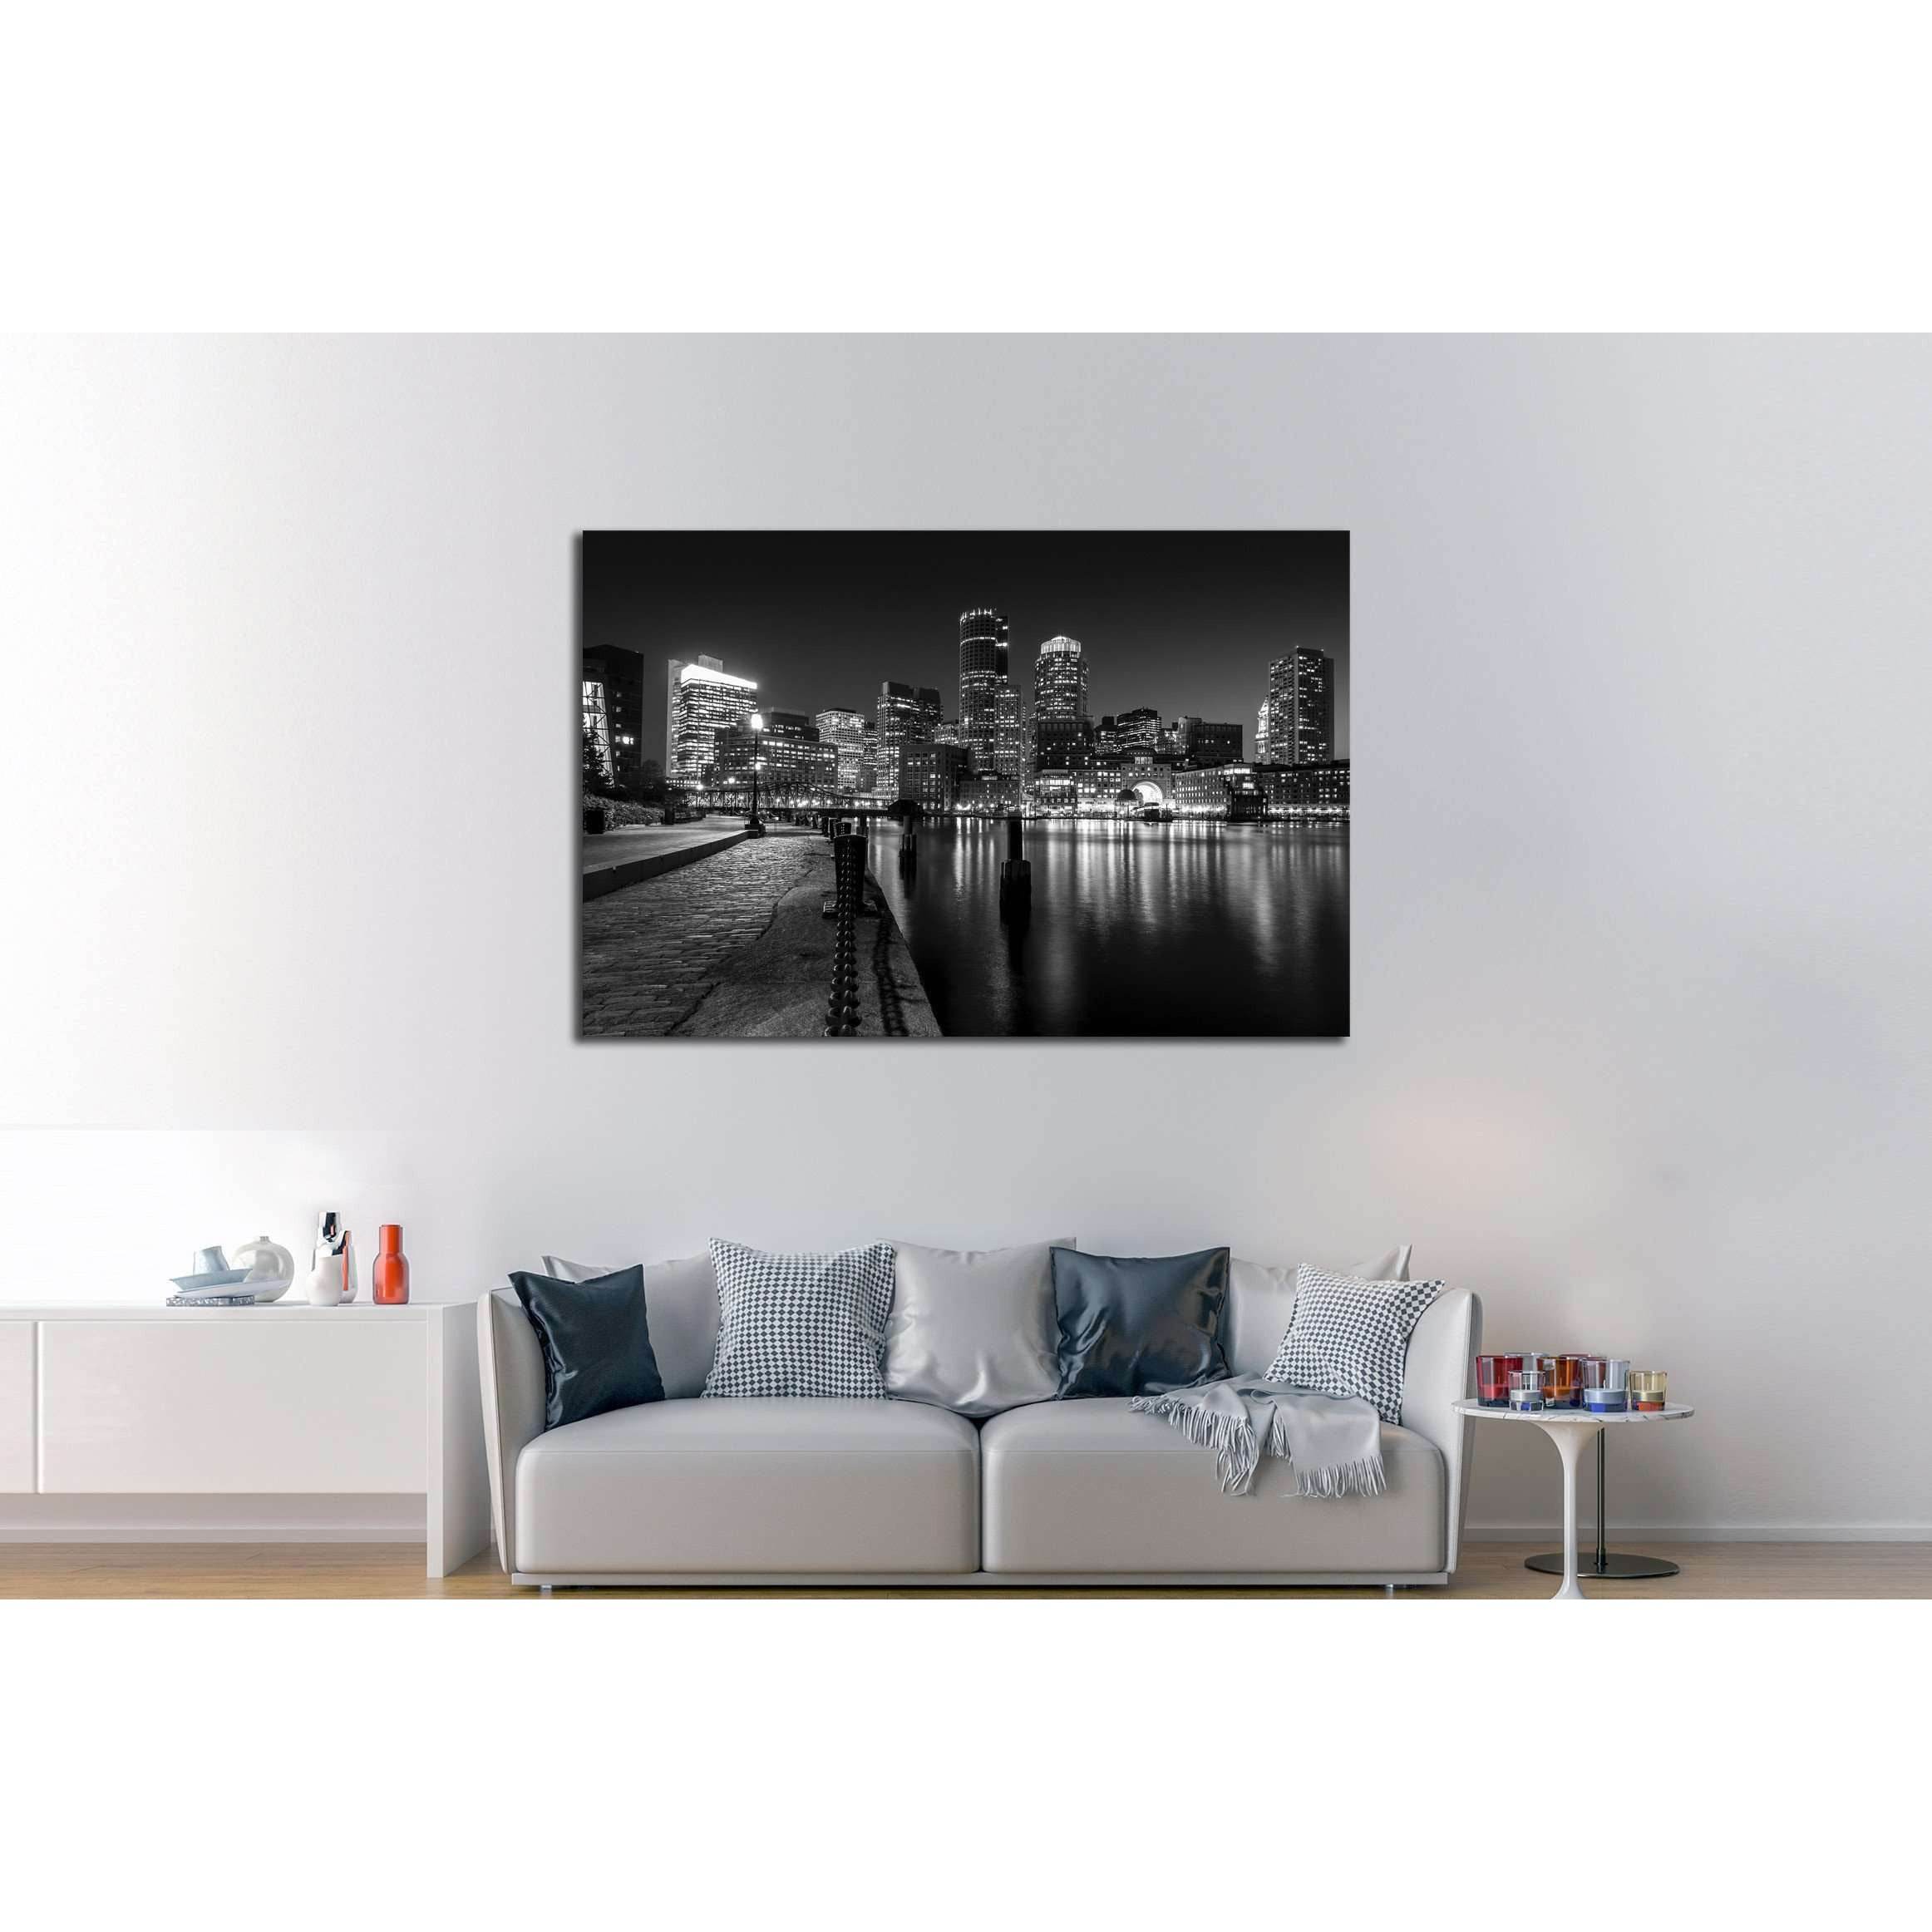 Boston Harbor at night in Black and White. Massachusetts, USA №2143 Ready to Hang Canvas Print